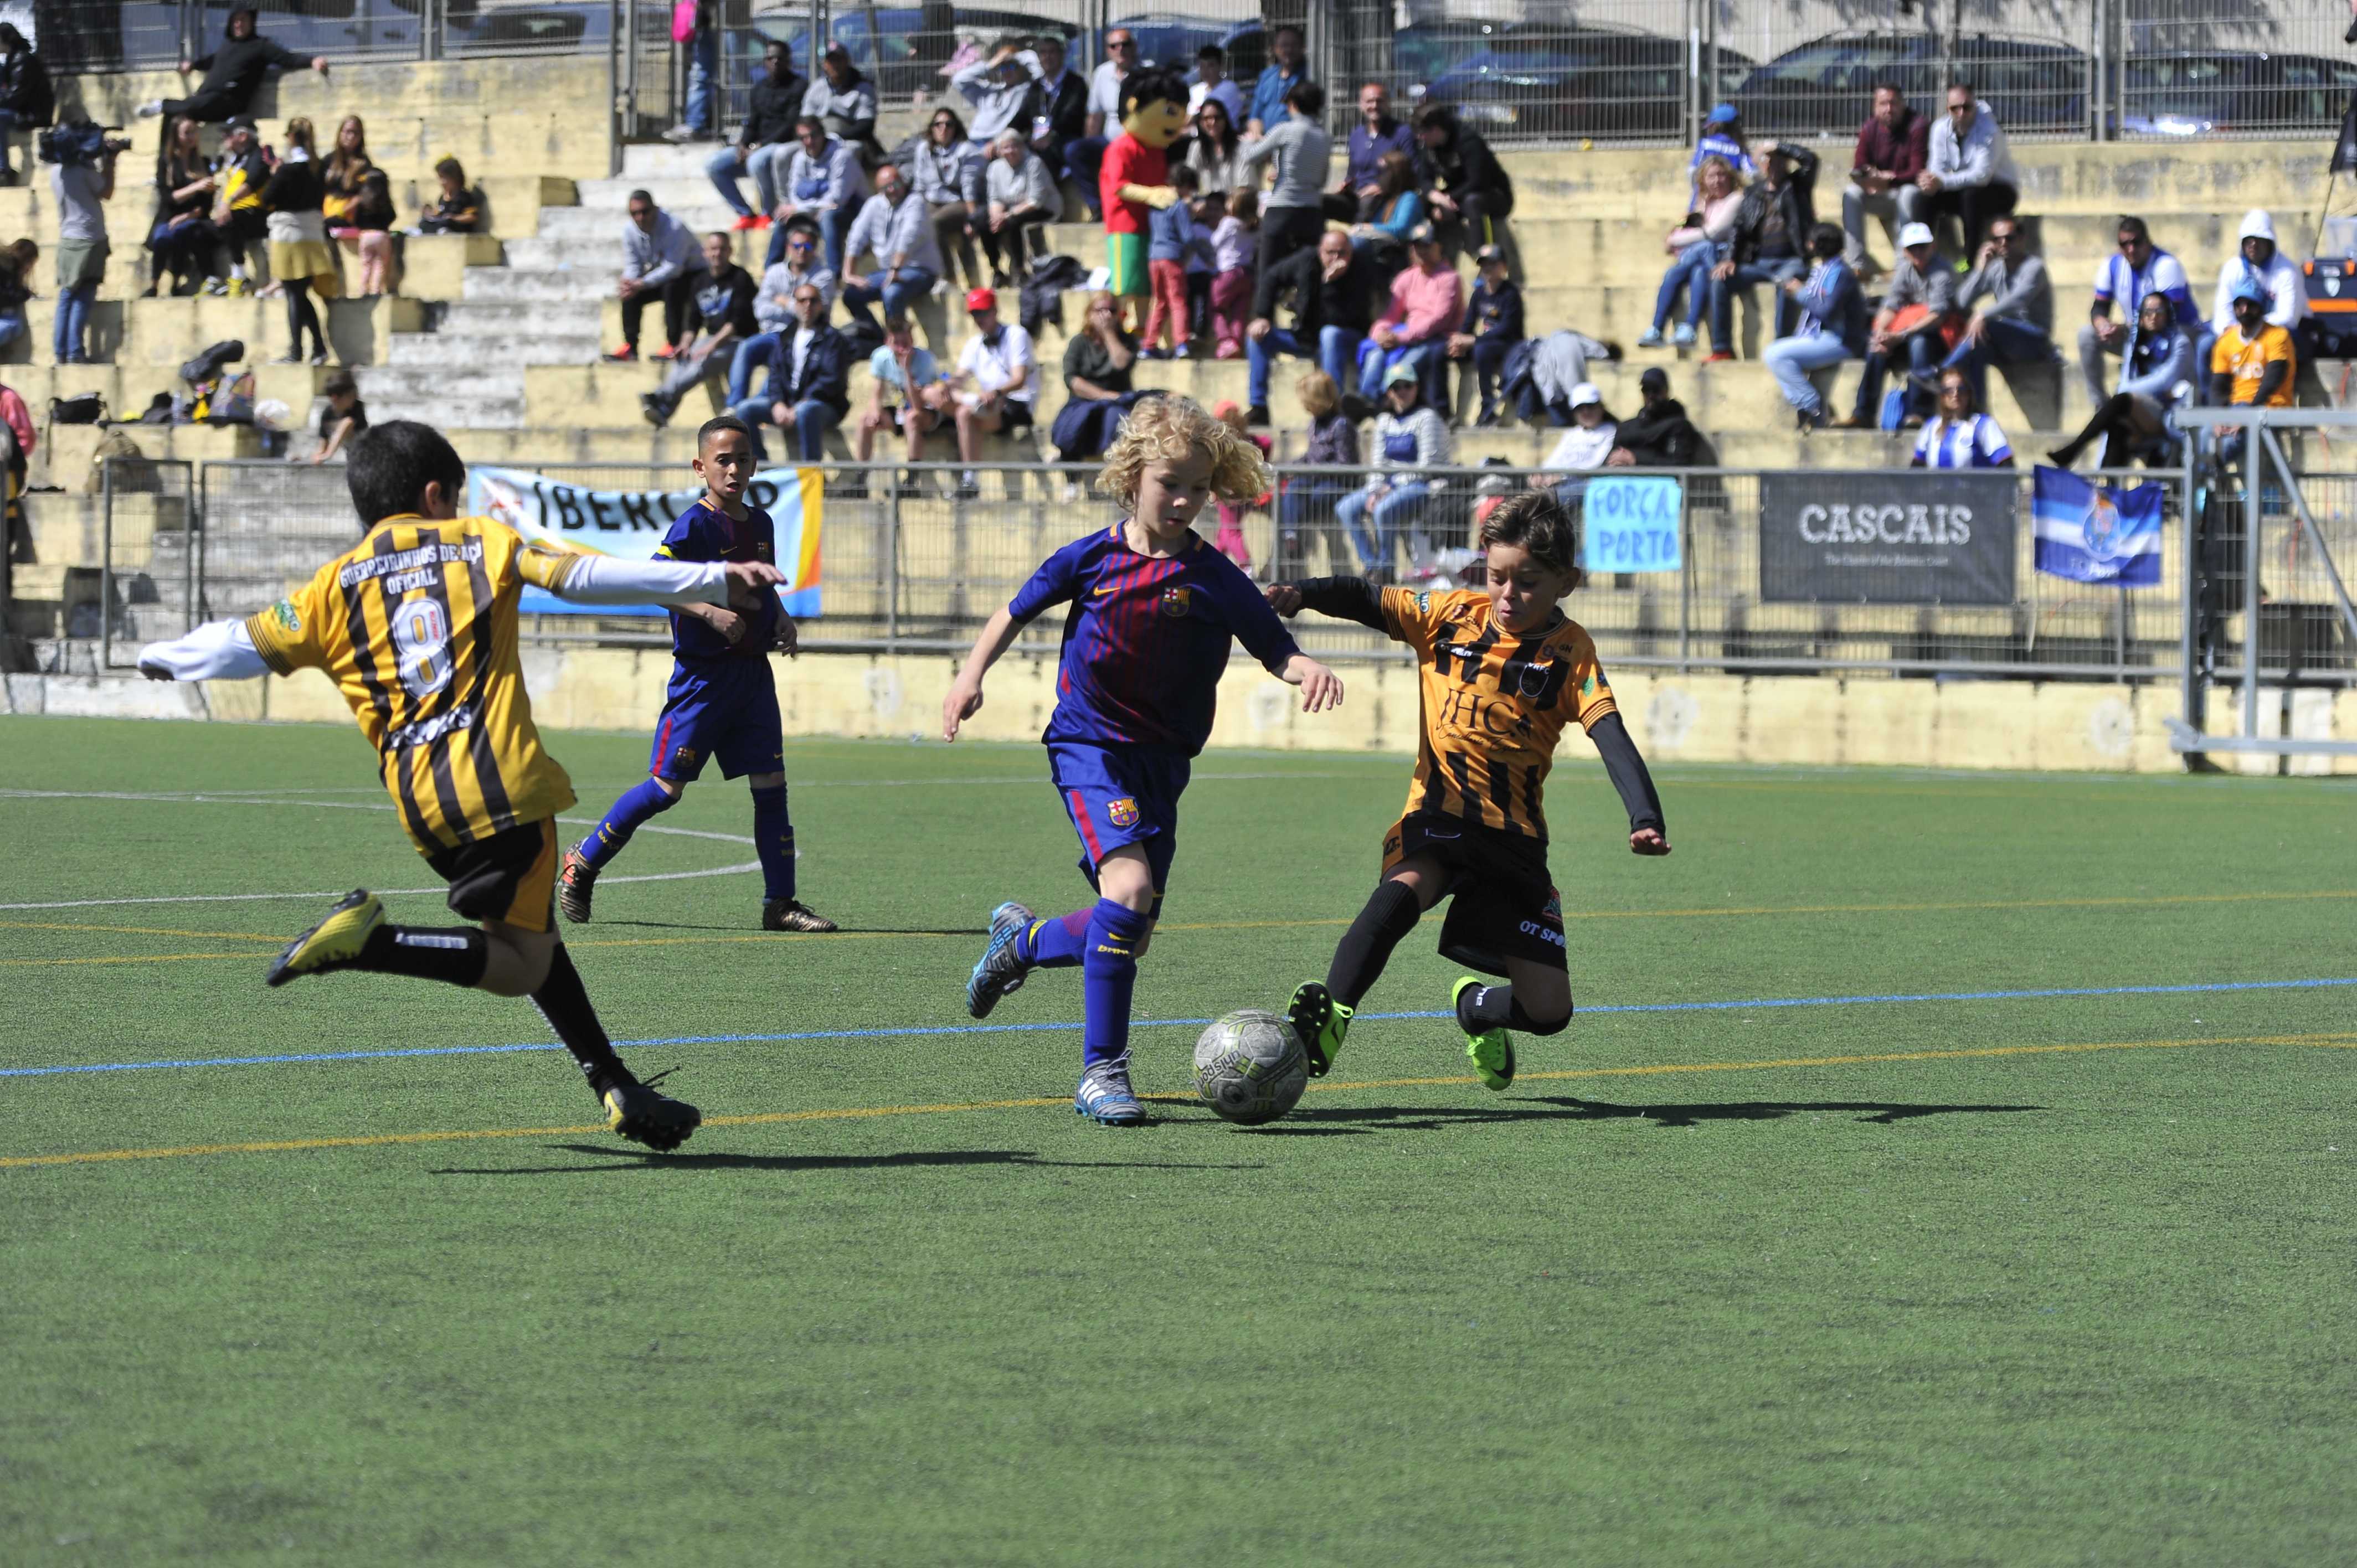 IberCup Cascais - young players on the ground - Road to Sport